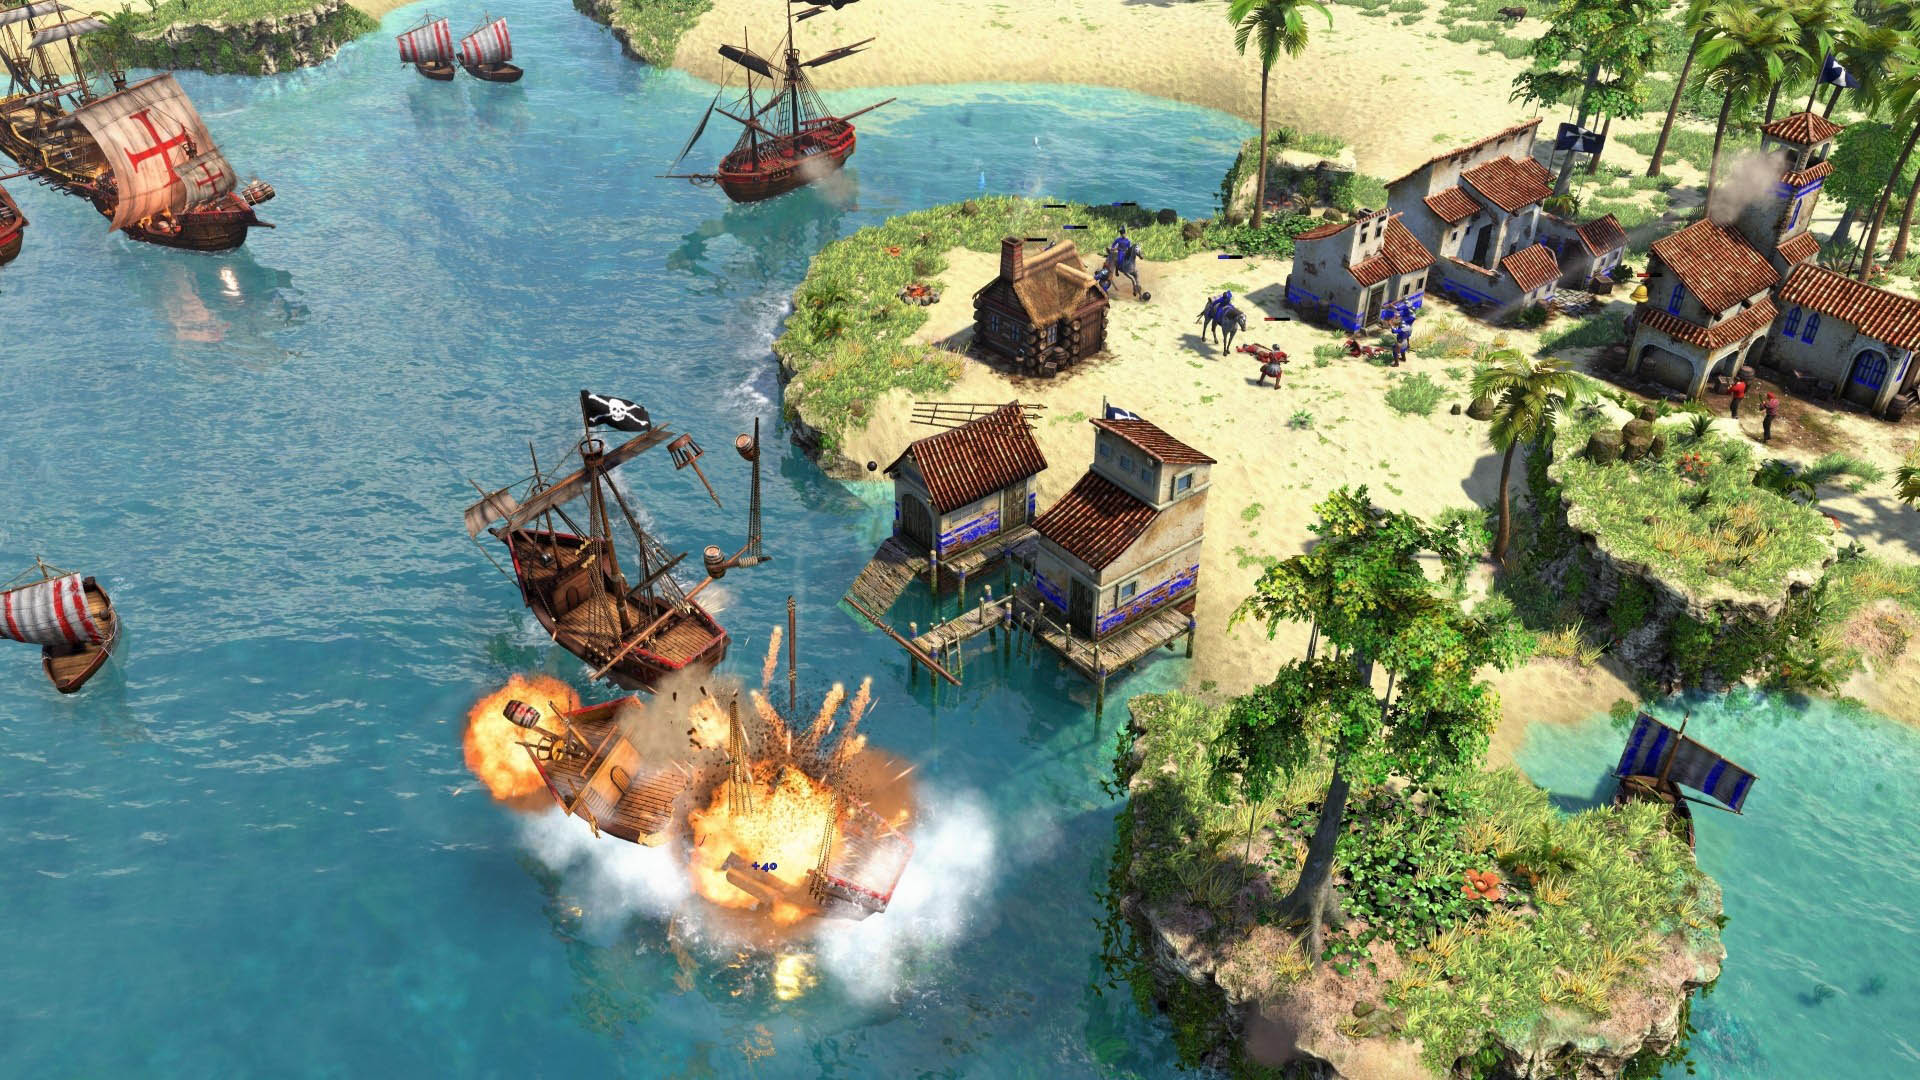 Age of water дата выхода. Age of Empires III: Definitive Edition. Age of Empires 3 Definitive Edition. Age of Empires III (3): Definitive Edition. Age of Empires III: Definitive Edition (2020).